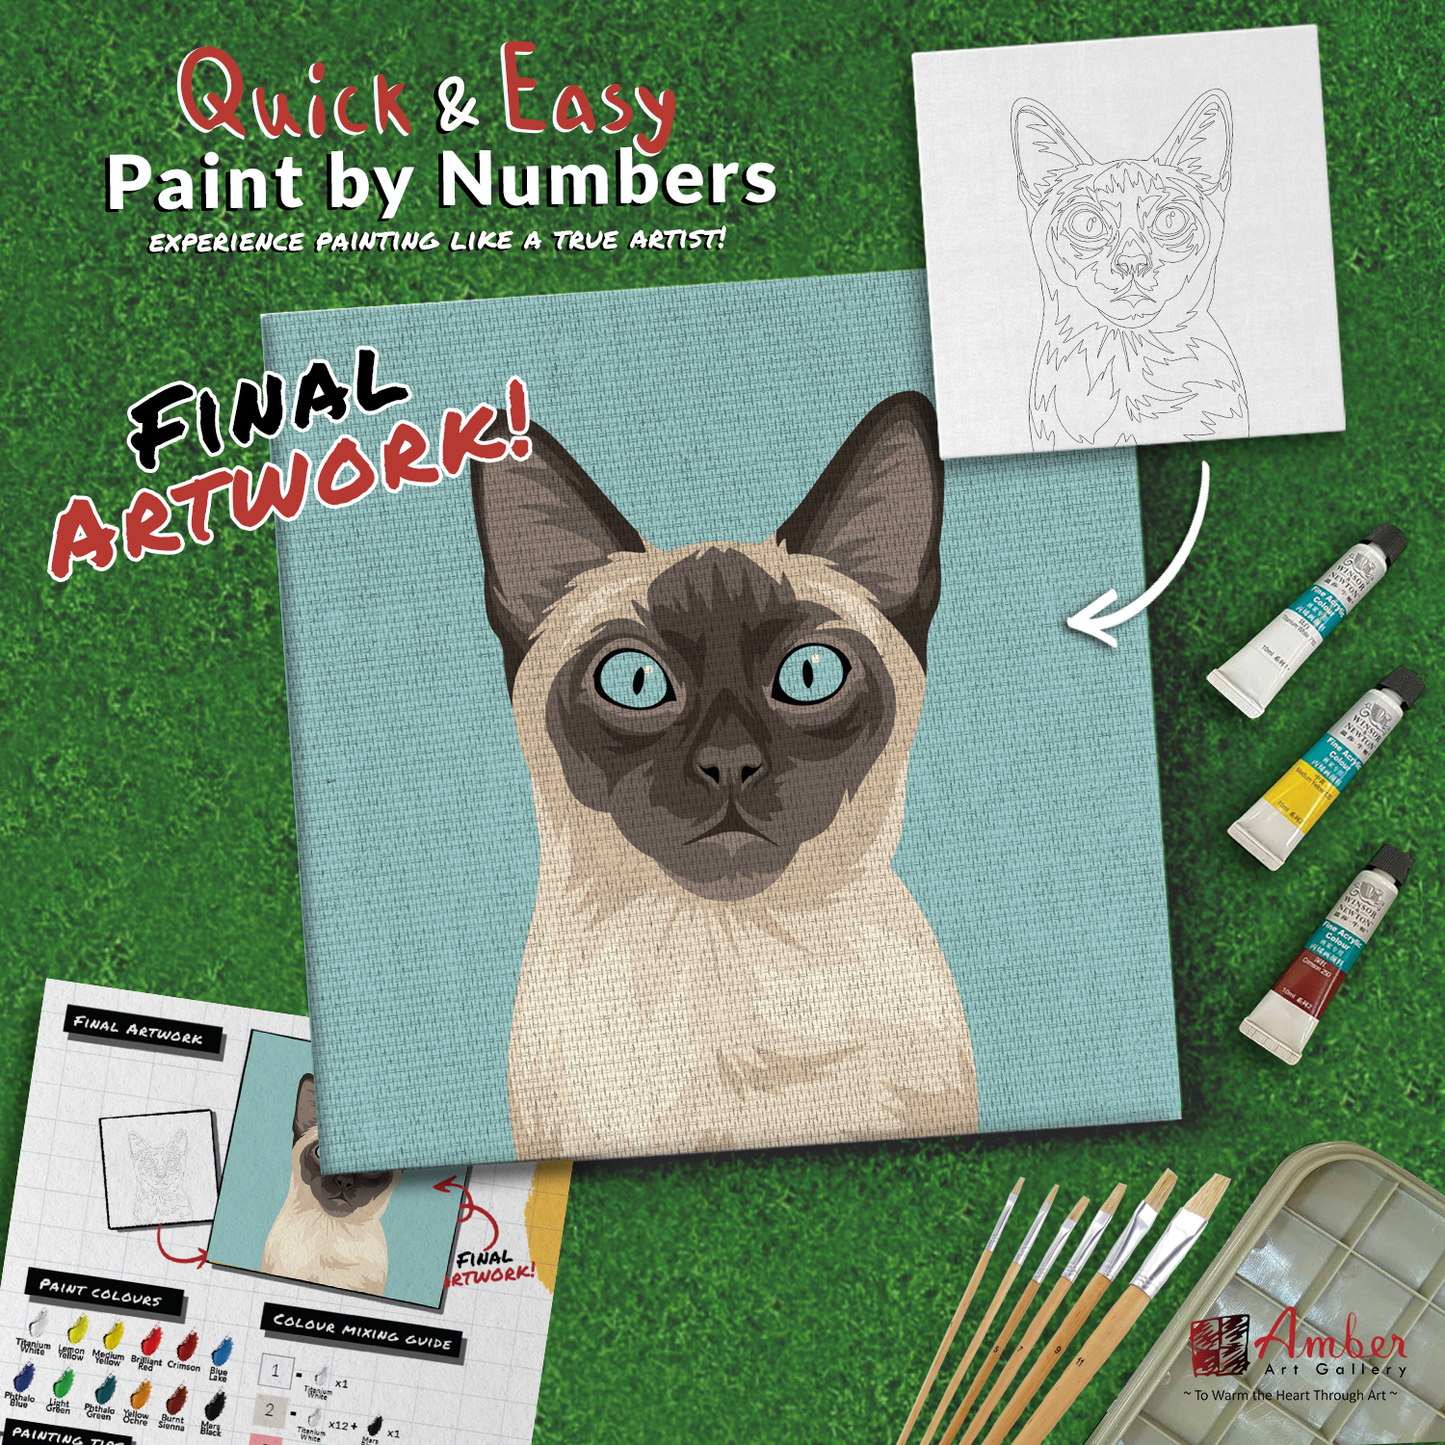 paint-by-numbers-painting-kit-cat-siamese-cat